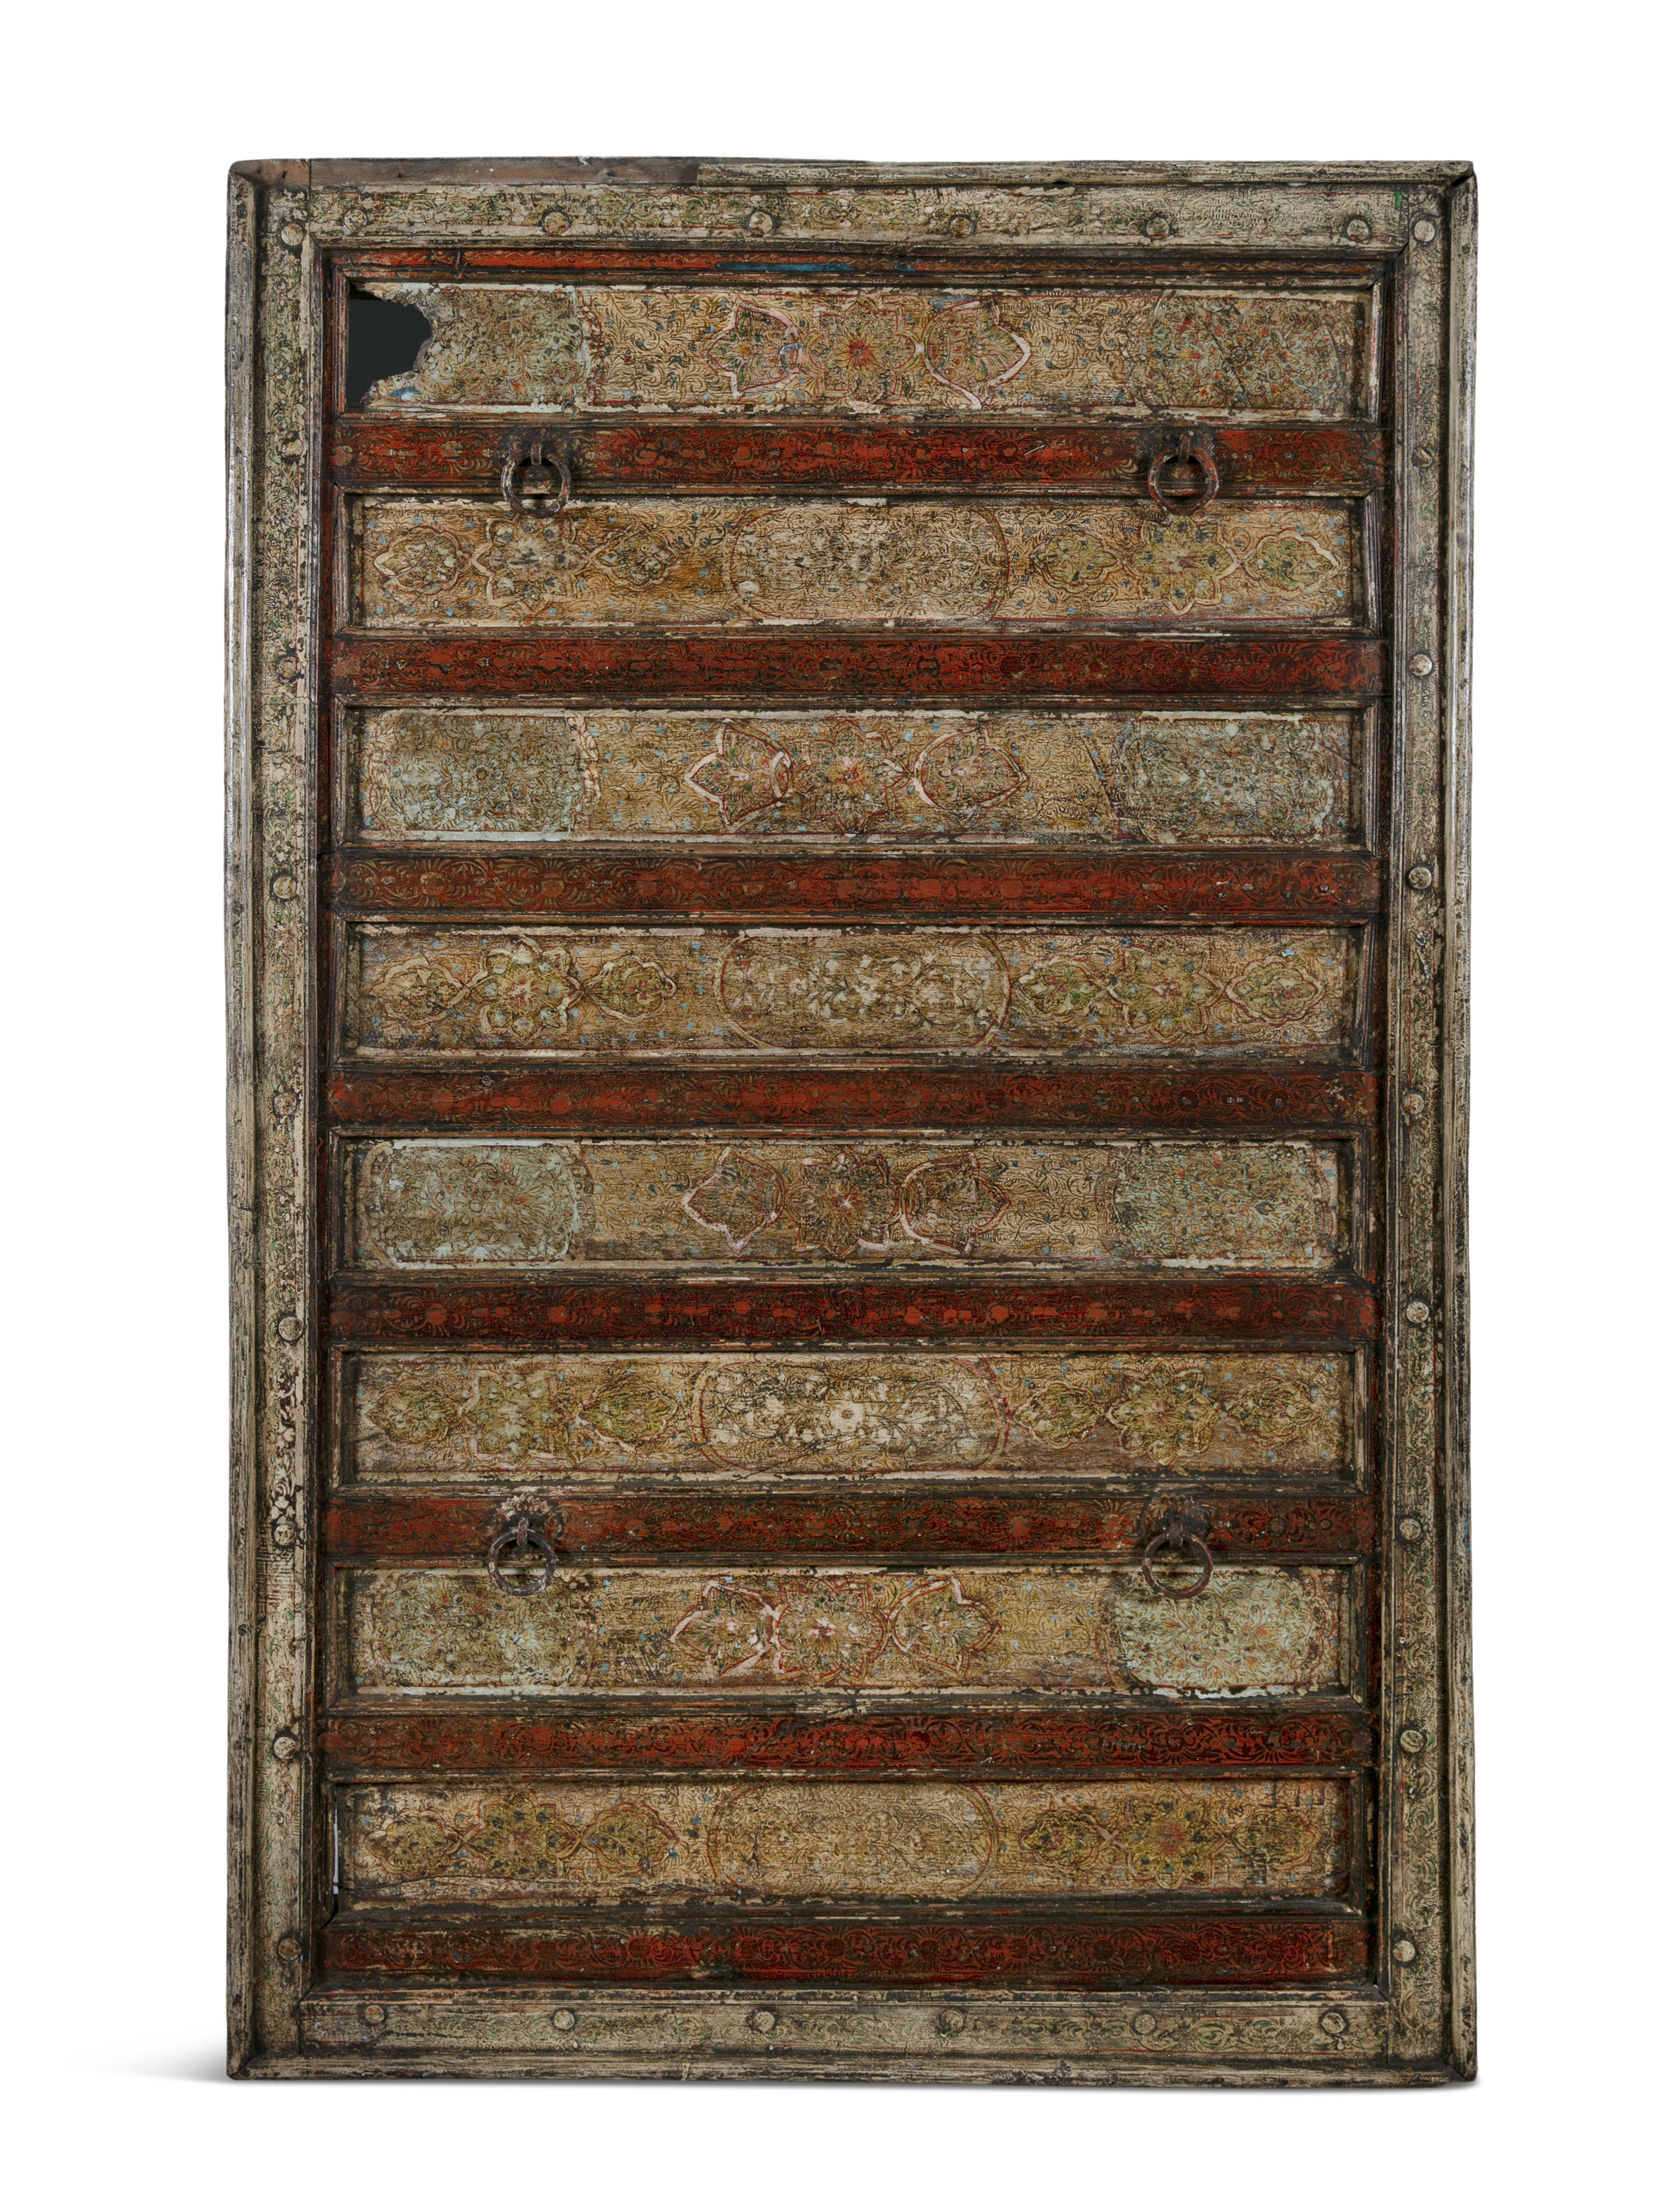 AN 18TH/19TH CENTURY MOORISH PAINTED TIMBER DOOR PANEL, with cast iron mounts and studded frame. 105